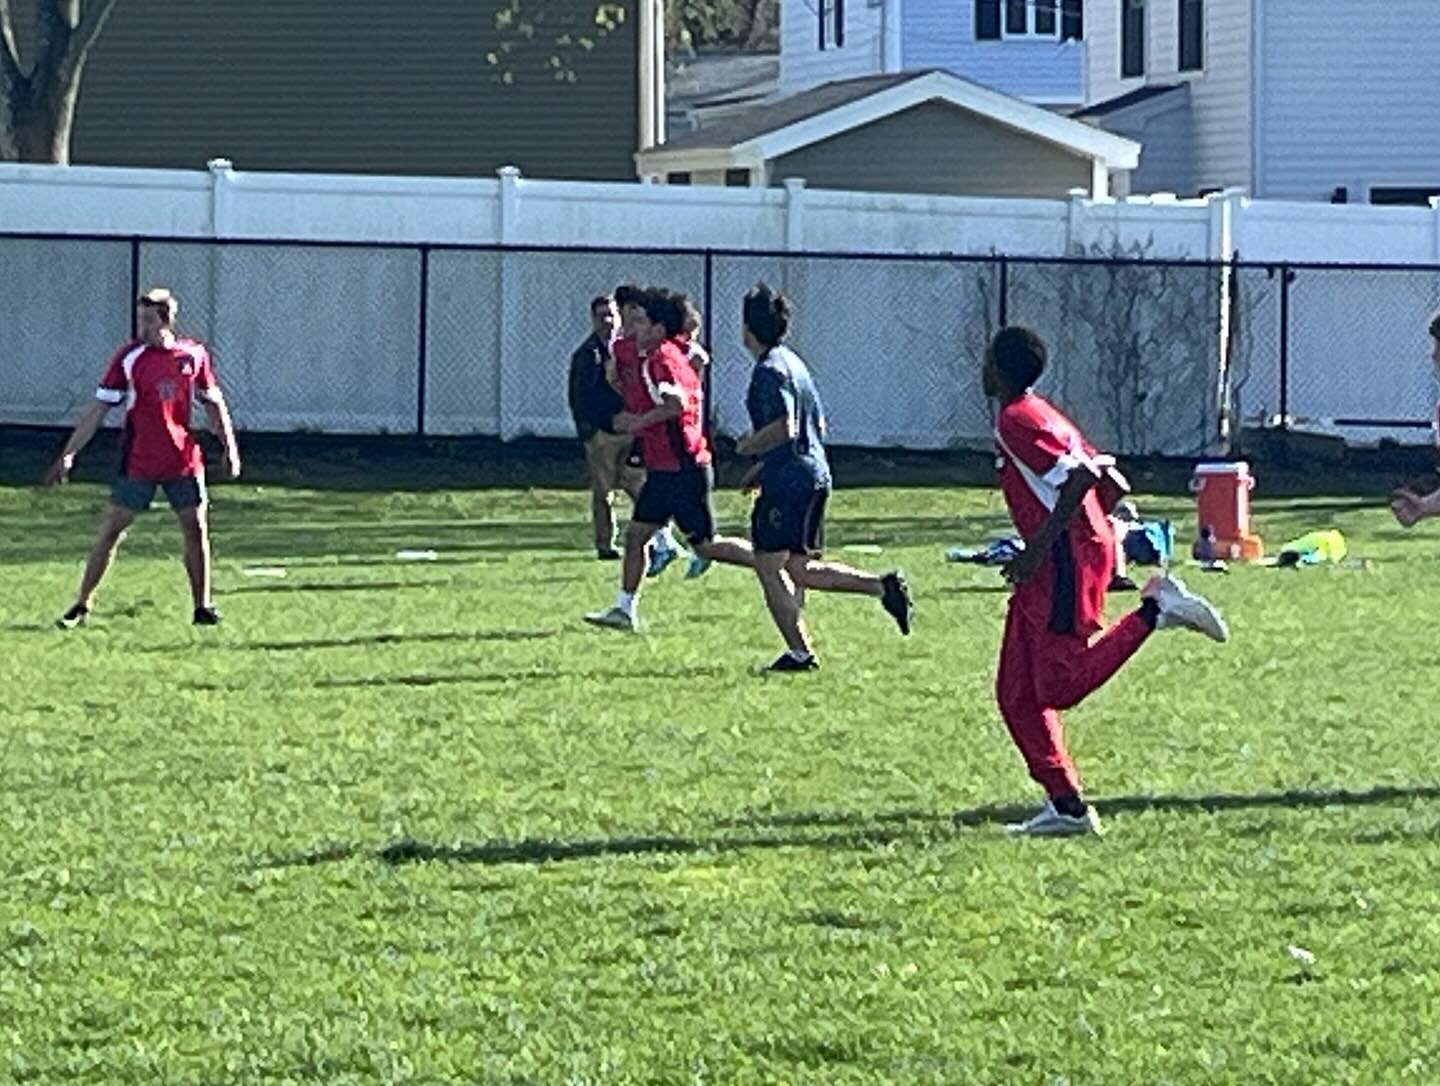 It was a great day for some WHS Ultimate! Nice score, Joel! @thewhsultimate